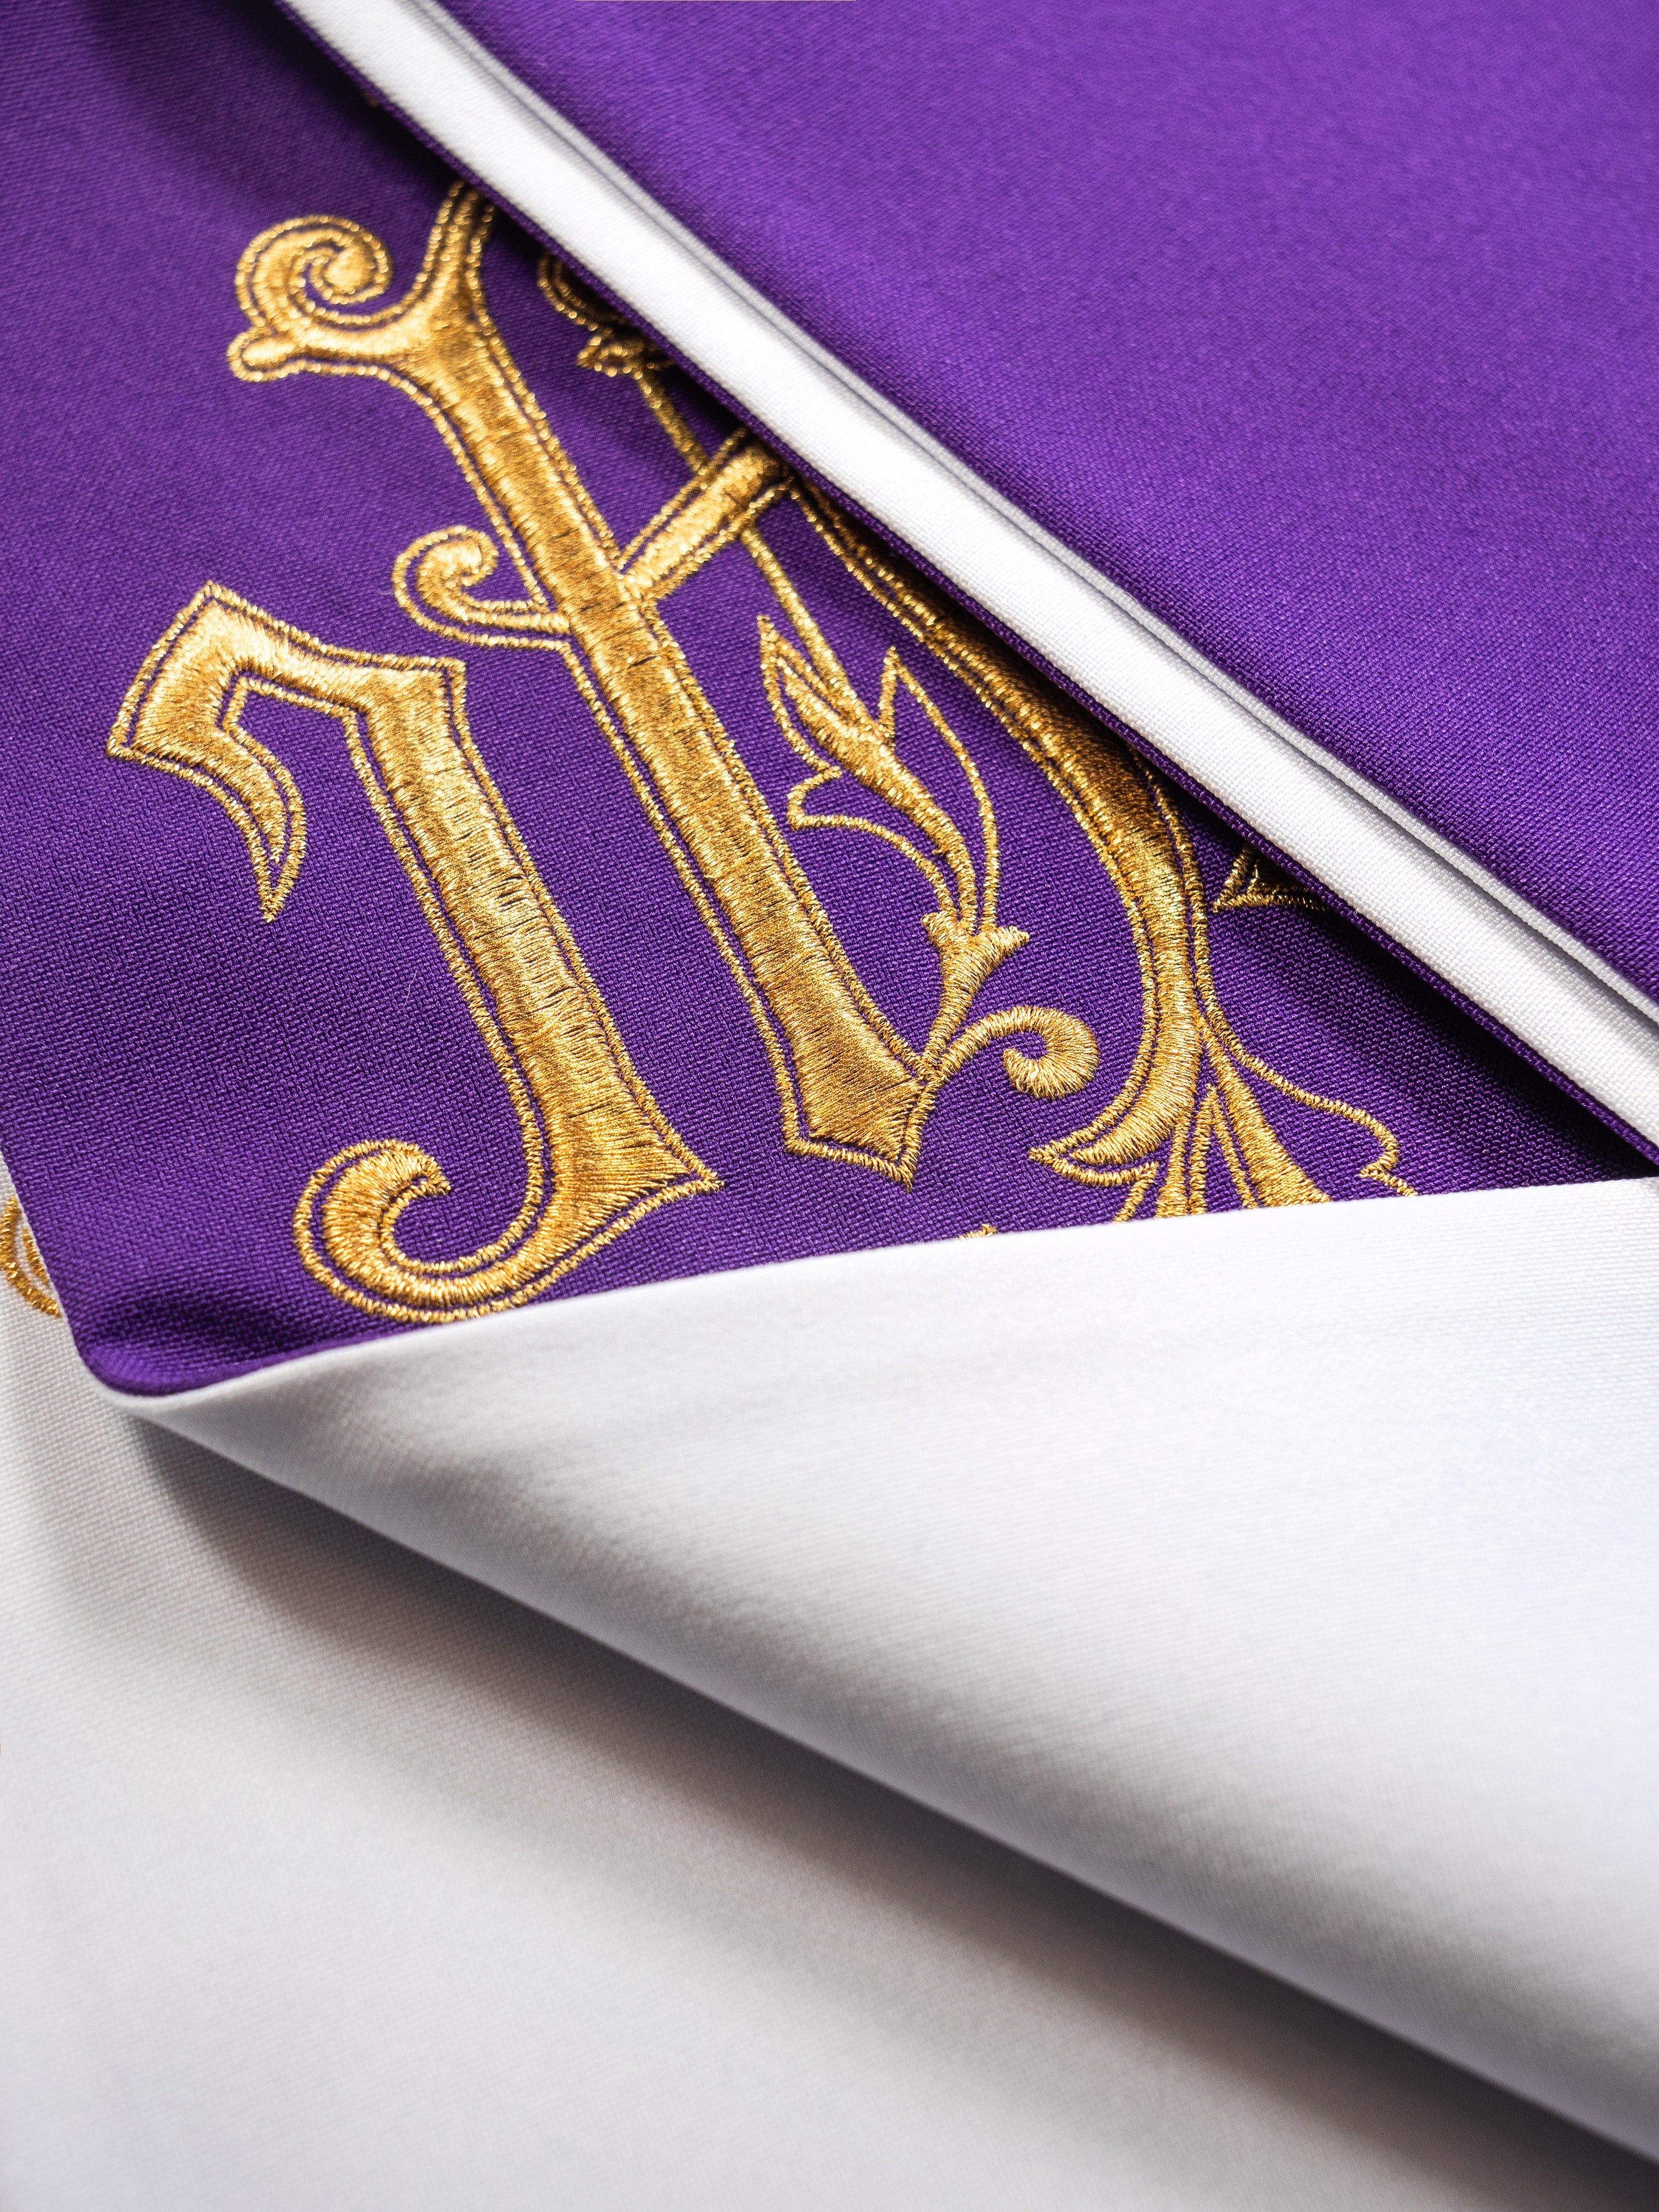 Double-sided embroidered stole IHS purple and white